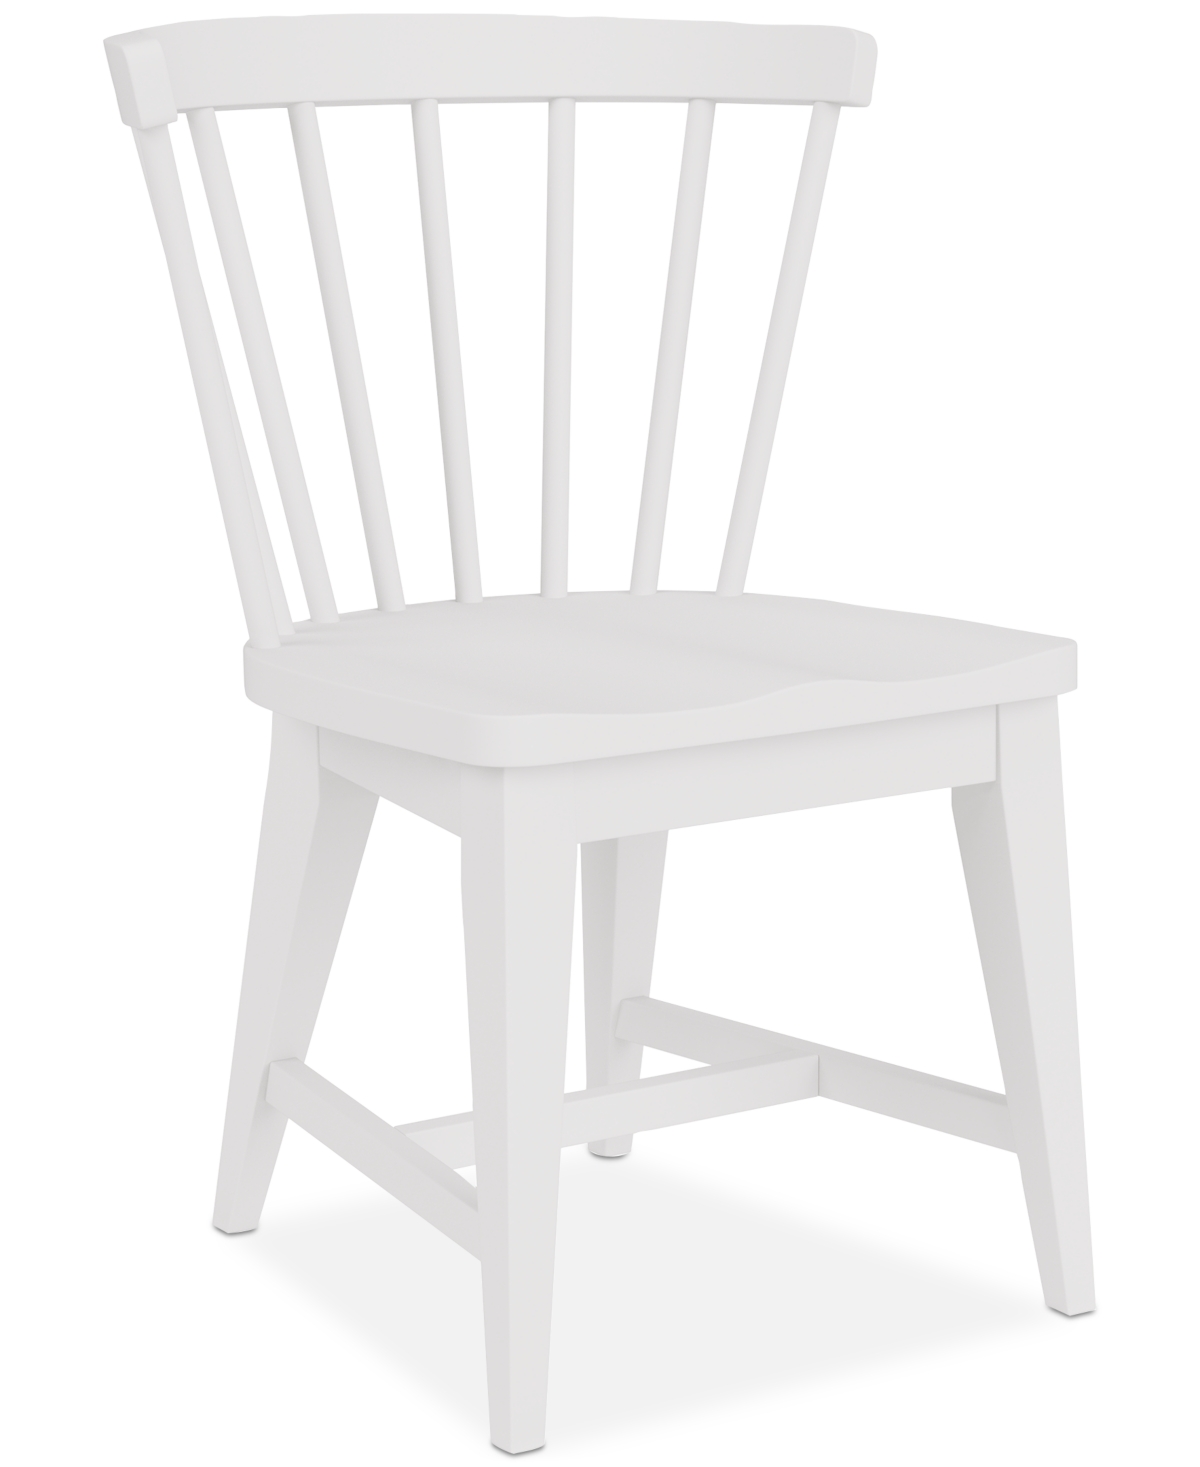 Shop Macy's Catriona 2 Pc. Wood Side Chair Set In White